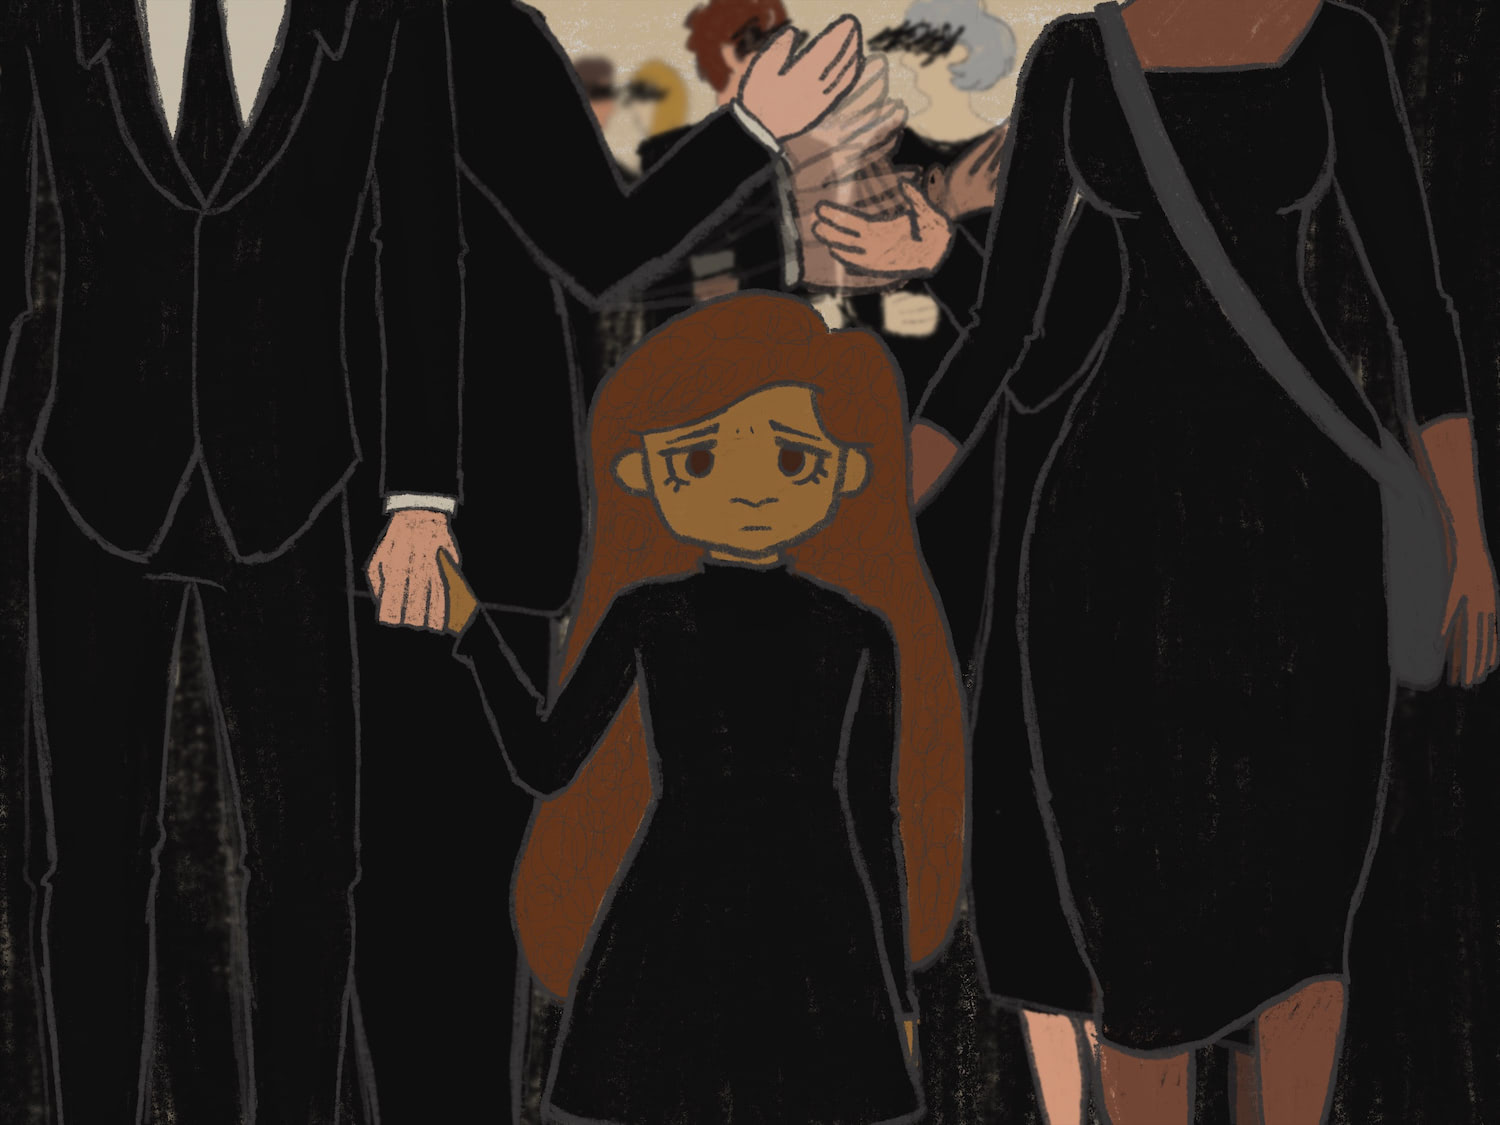 A young girl walking hand in hand with her parents at a funeral. A crowd of funeral goers are talking in the background.